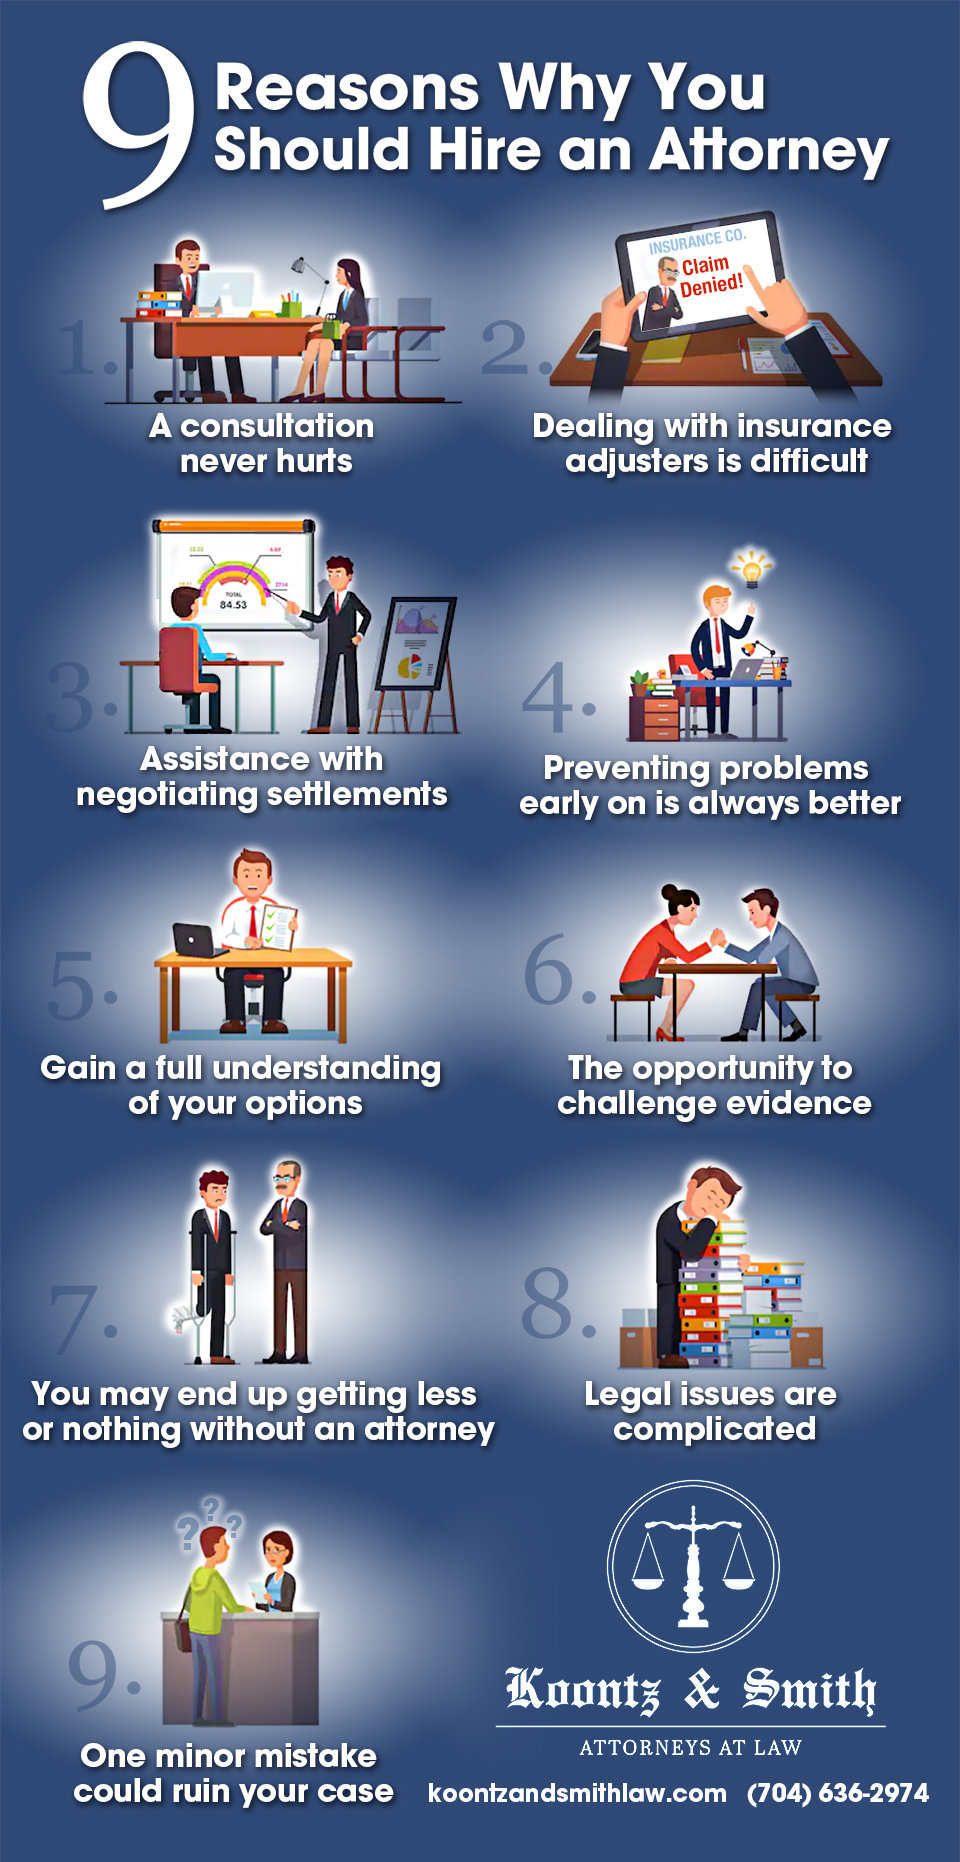 9 Reasons Why You Should Hire an Attorney [infographic]